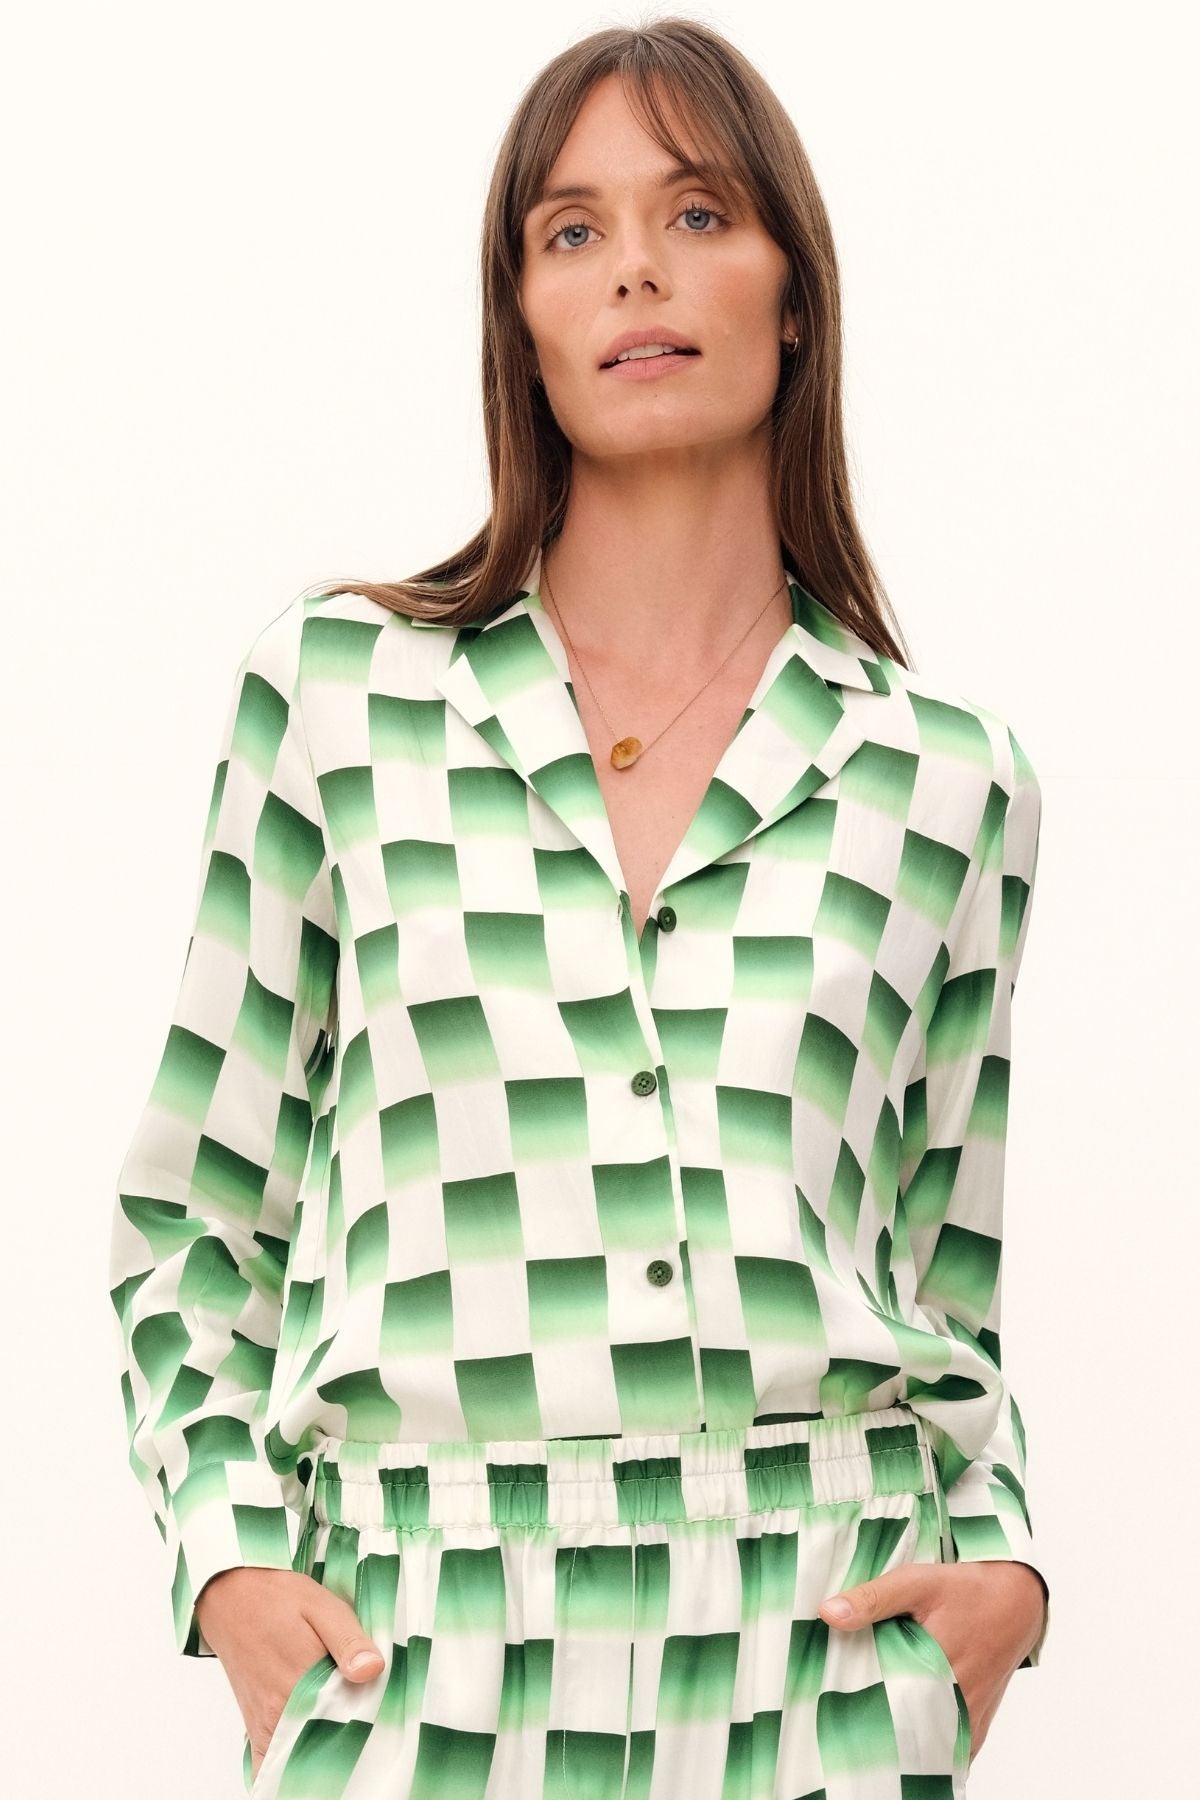 The Odyssey Blouse by GINGER & SMART is a luxurious silk twill with a checkerboard print in deep forest green and crisp white. It has a relaxed longline fit, straight hem, and GINGER & SMART logo Corozo nut buttons along the front.